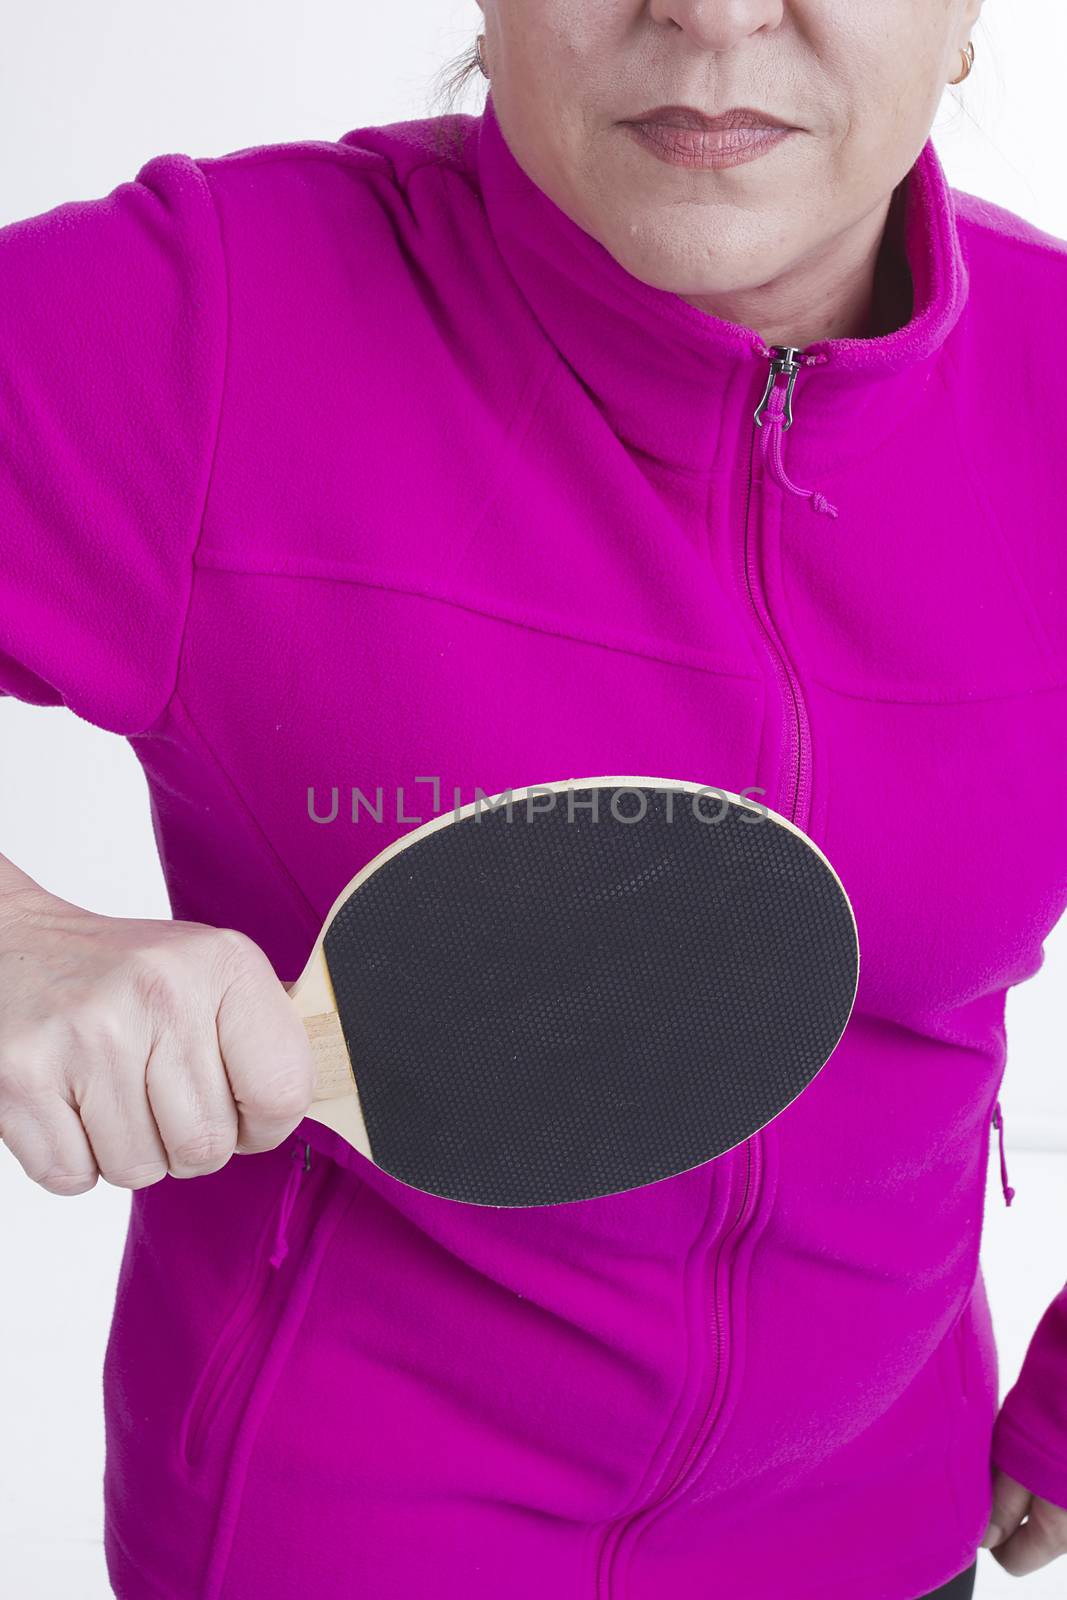 Active senior woman playing table tennis in front of white background